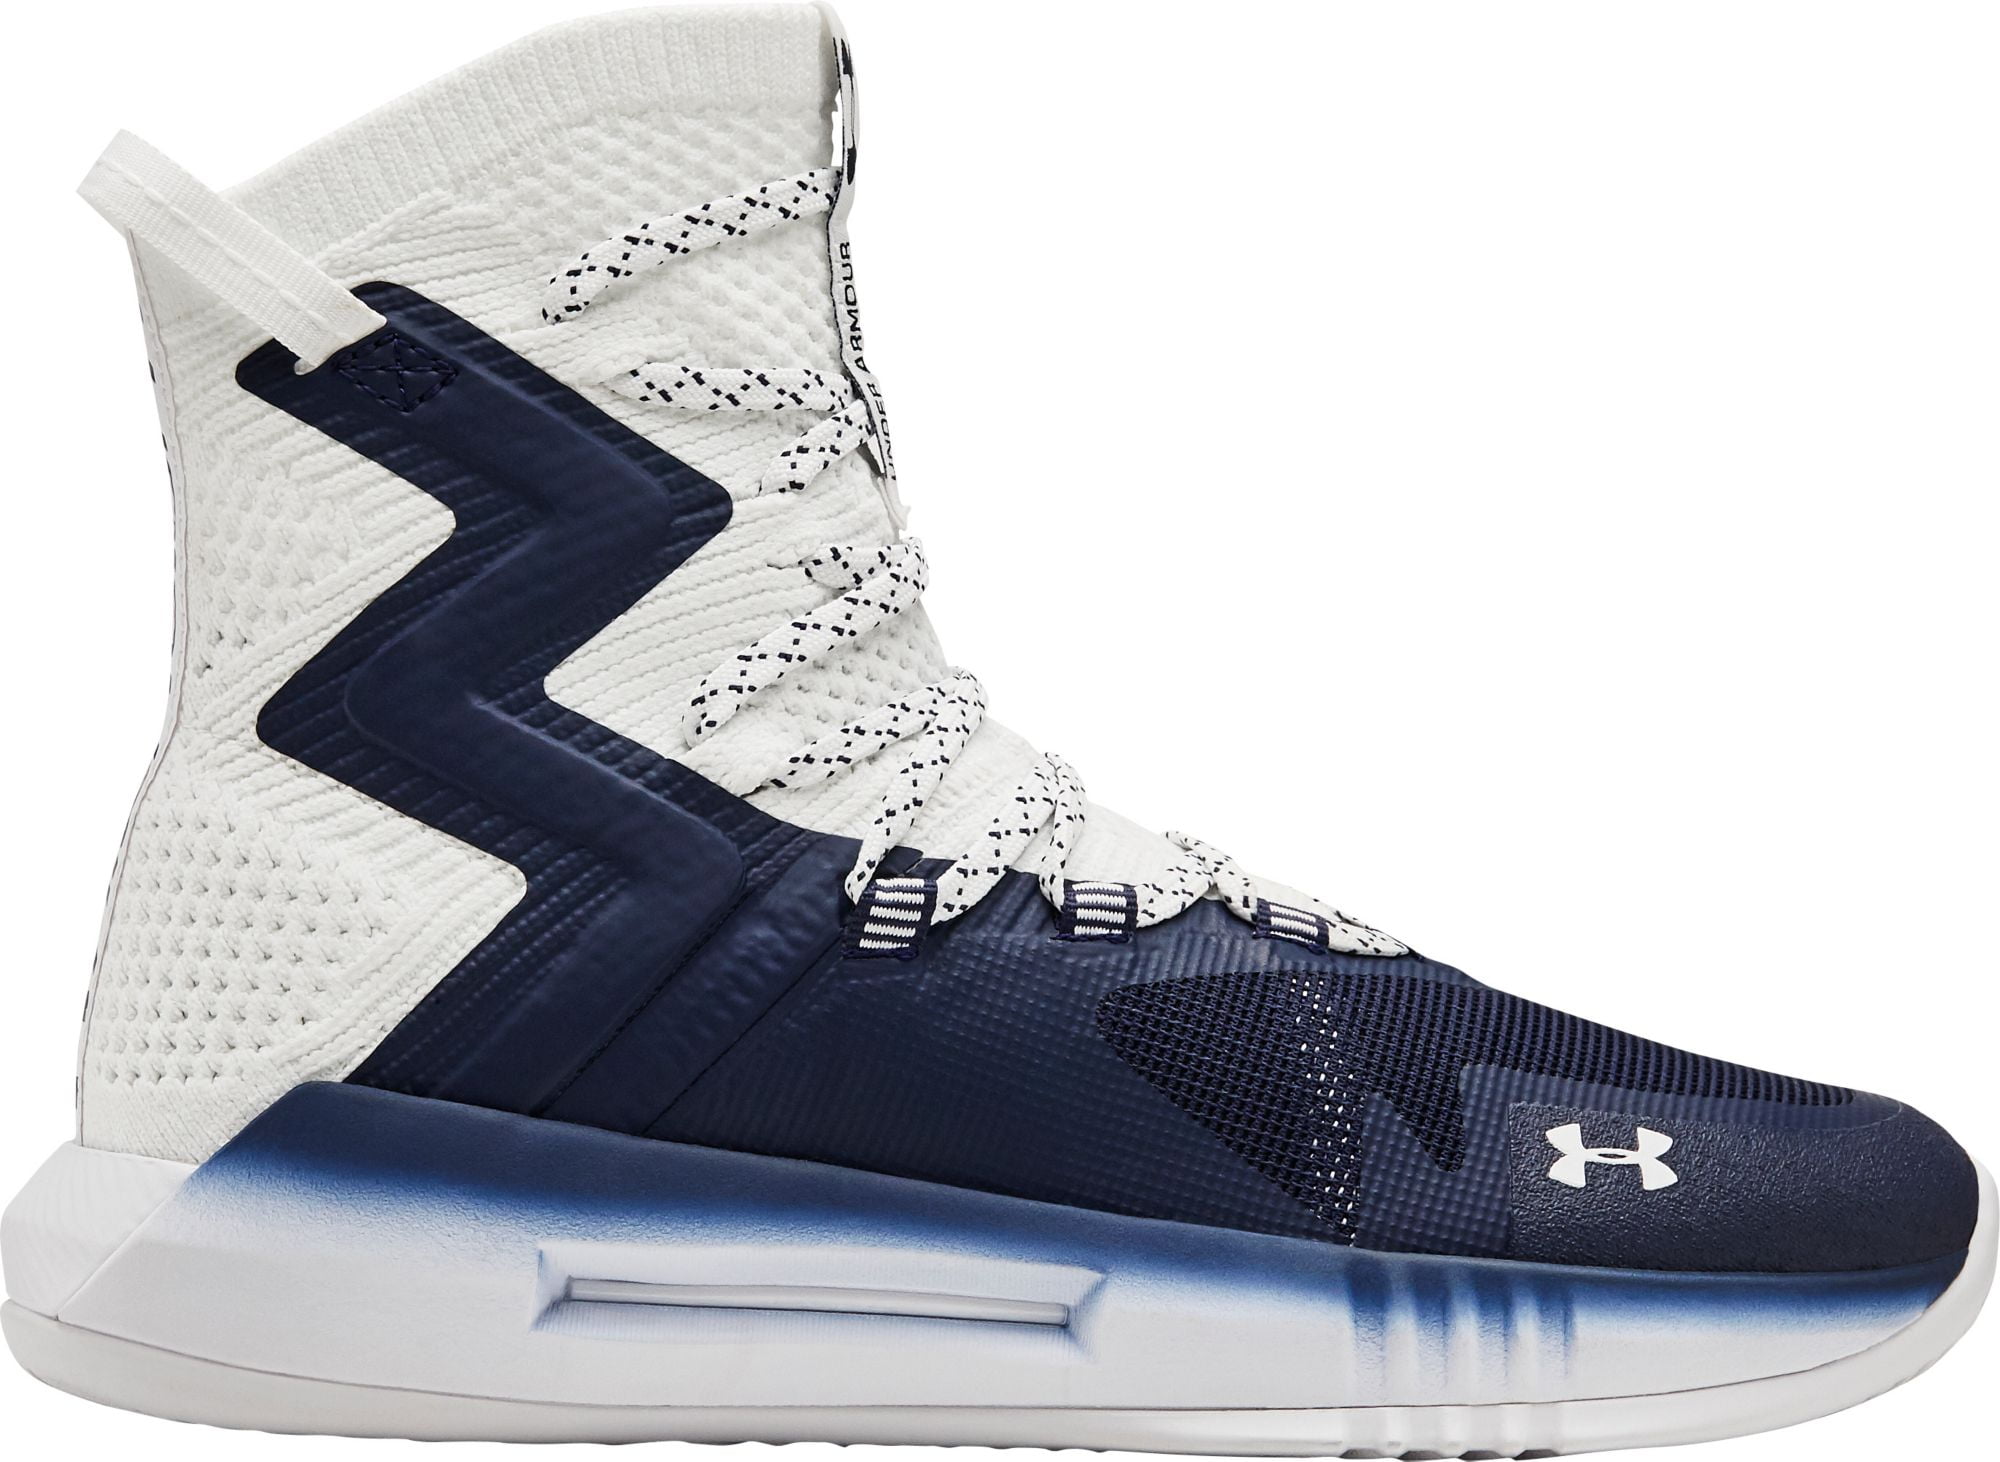 under armour highlight ace 2.0 volleyball shoe